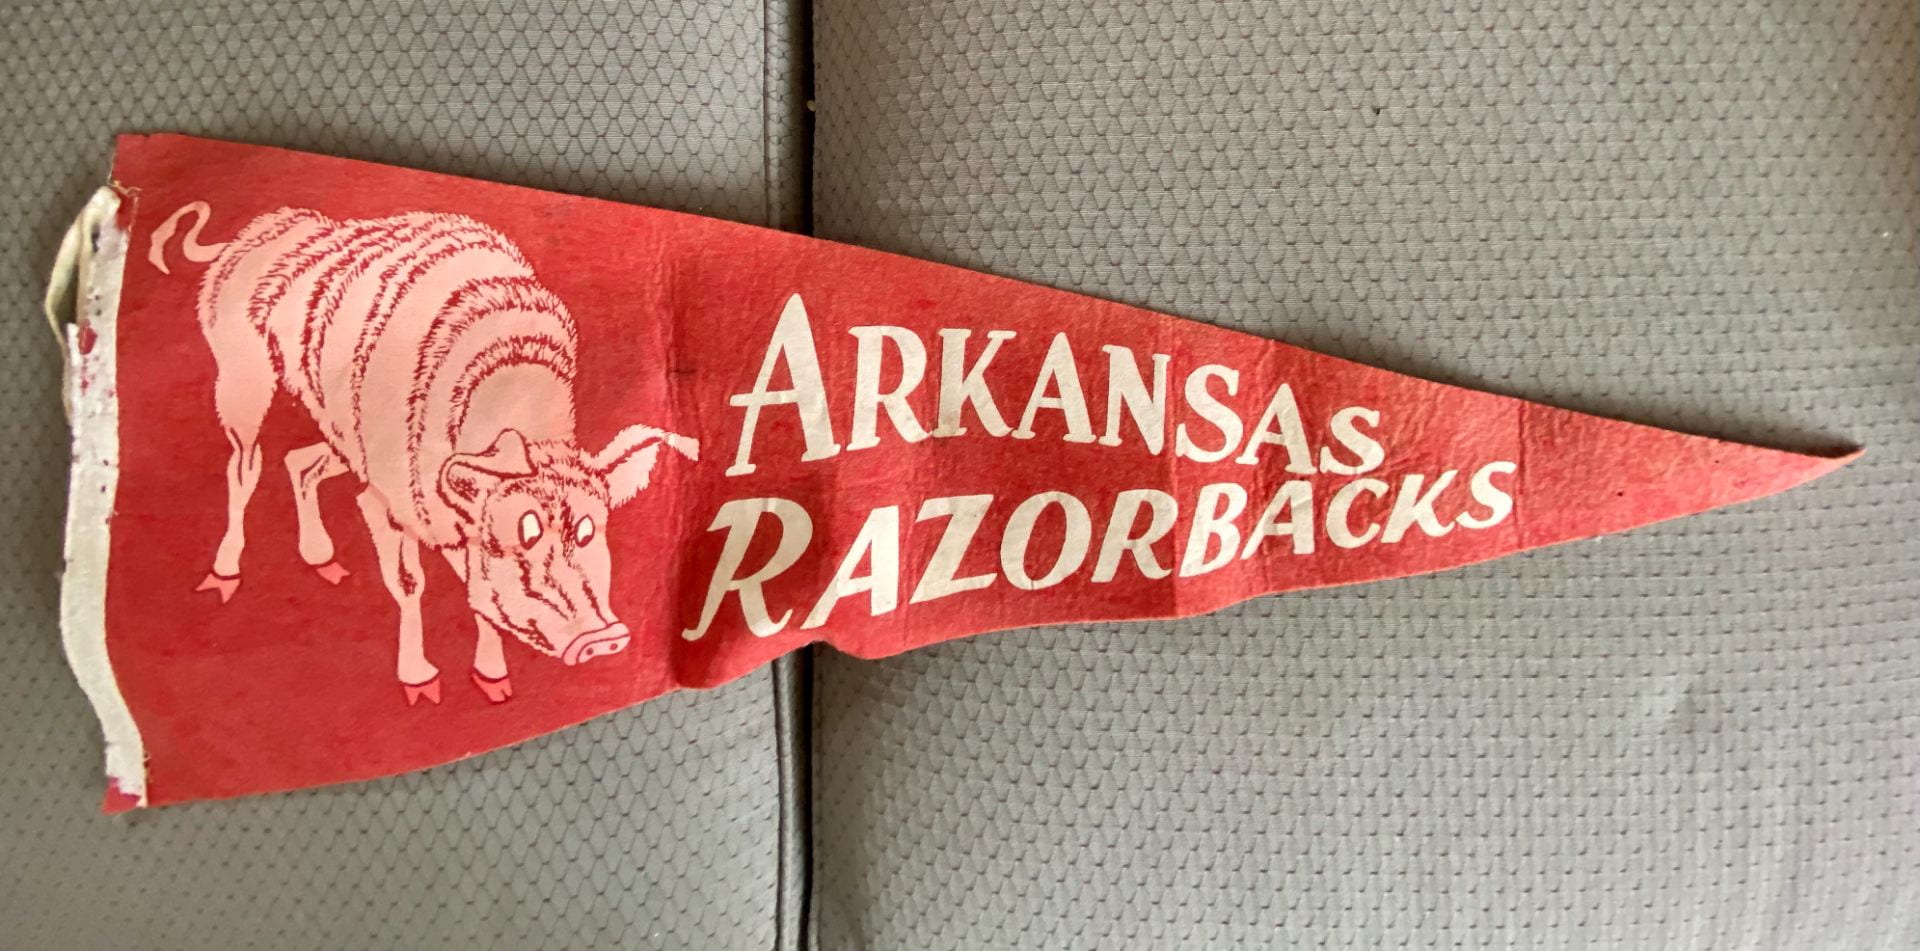 A red pennant with a pig illustration on the widest part and "Arkansas Razorbacks" to its right.